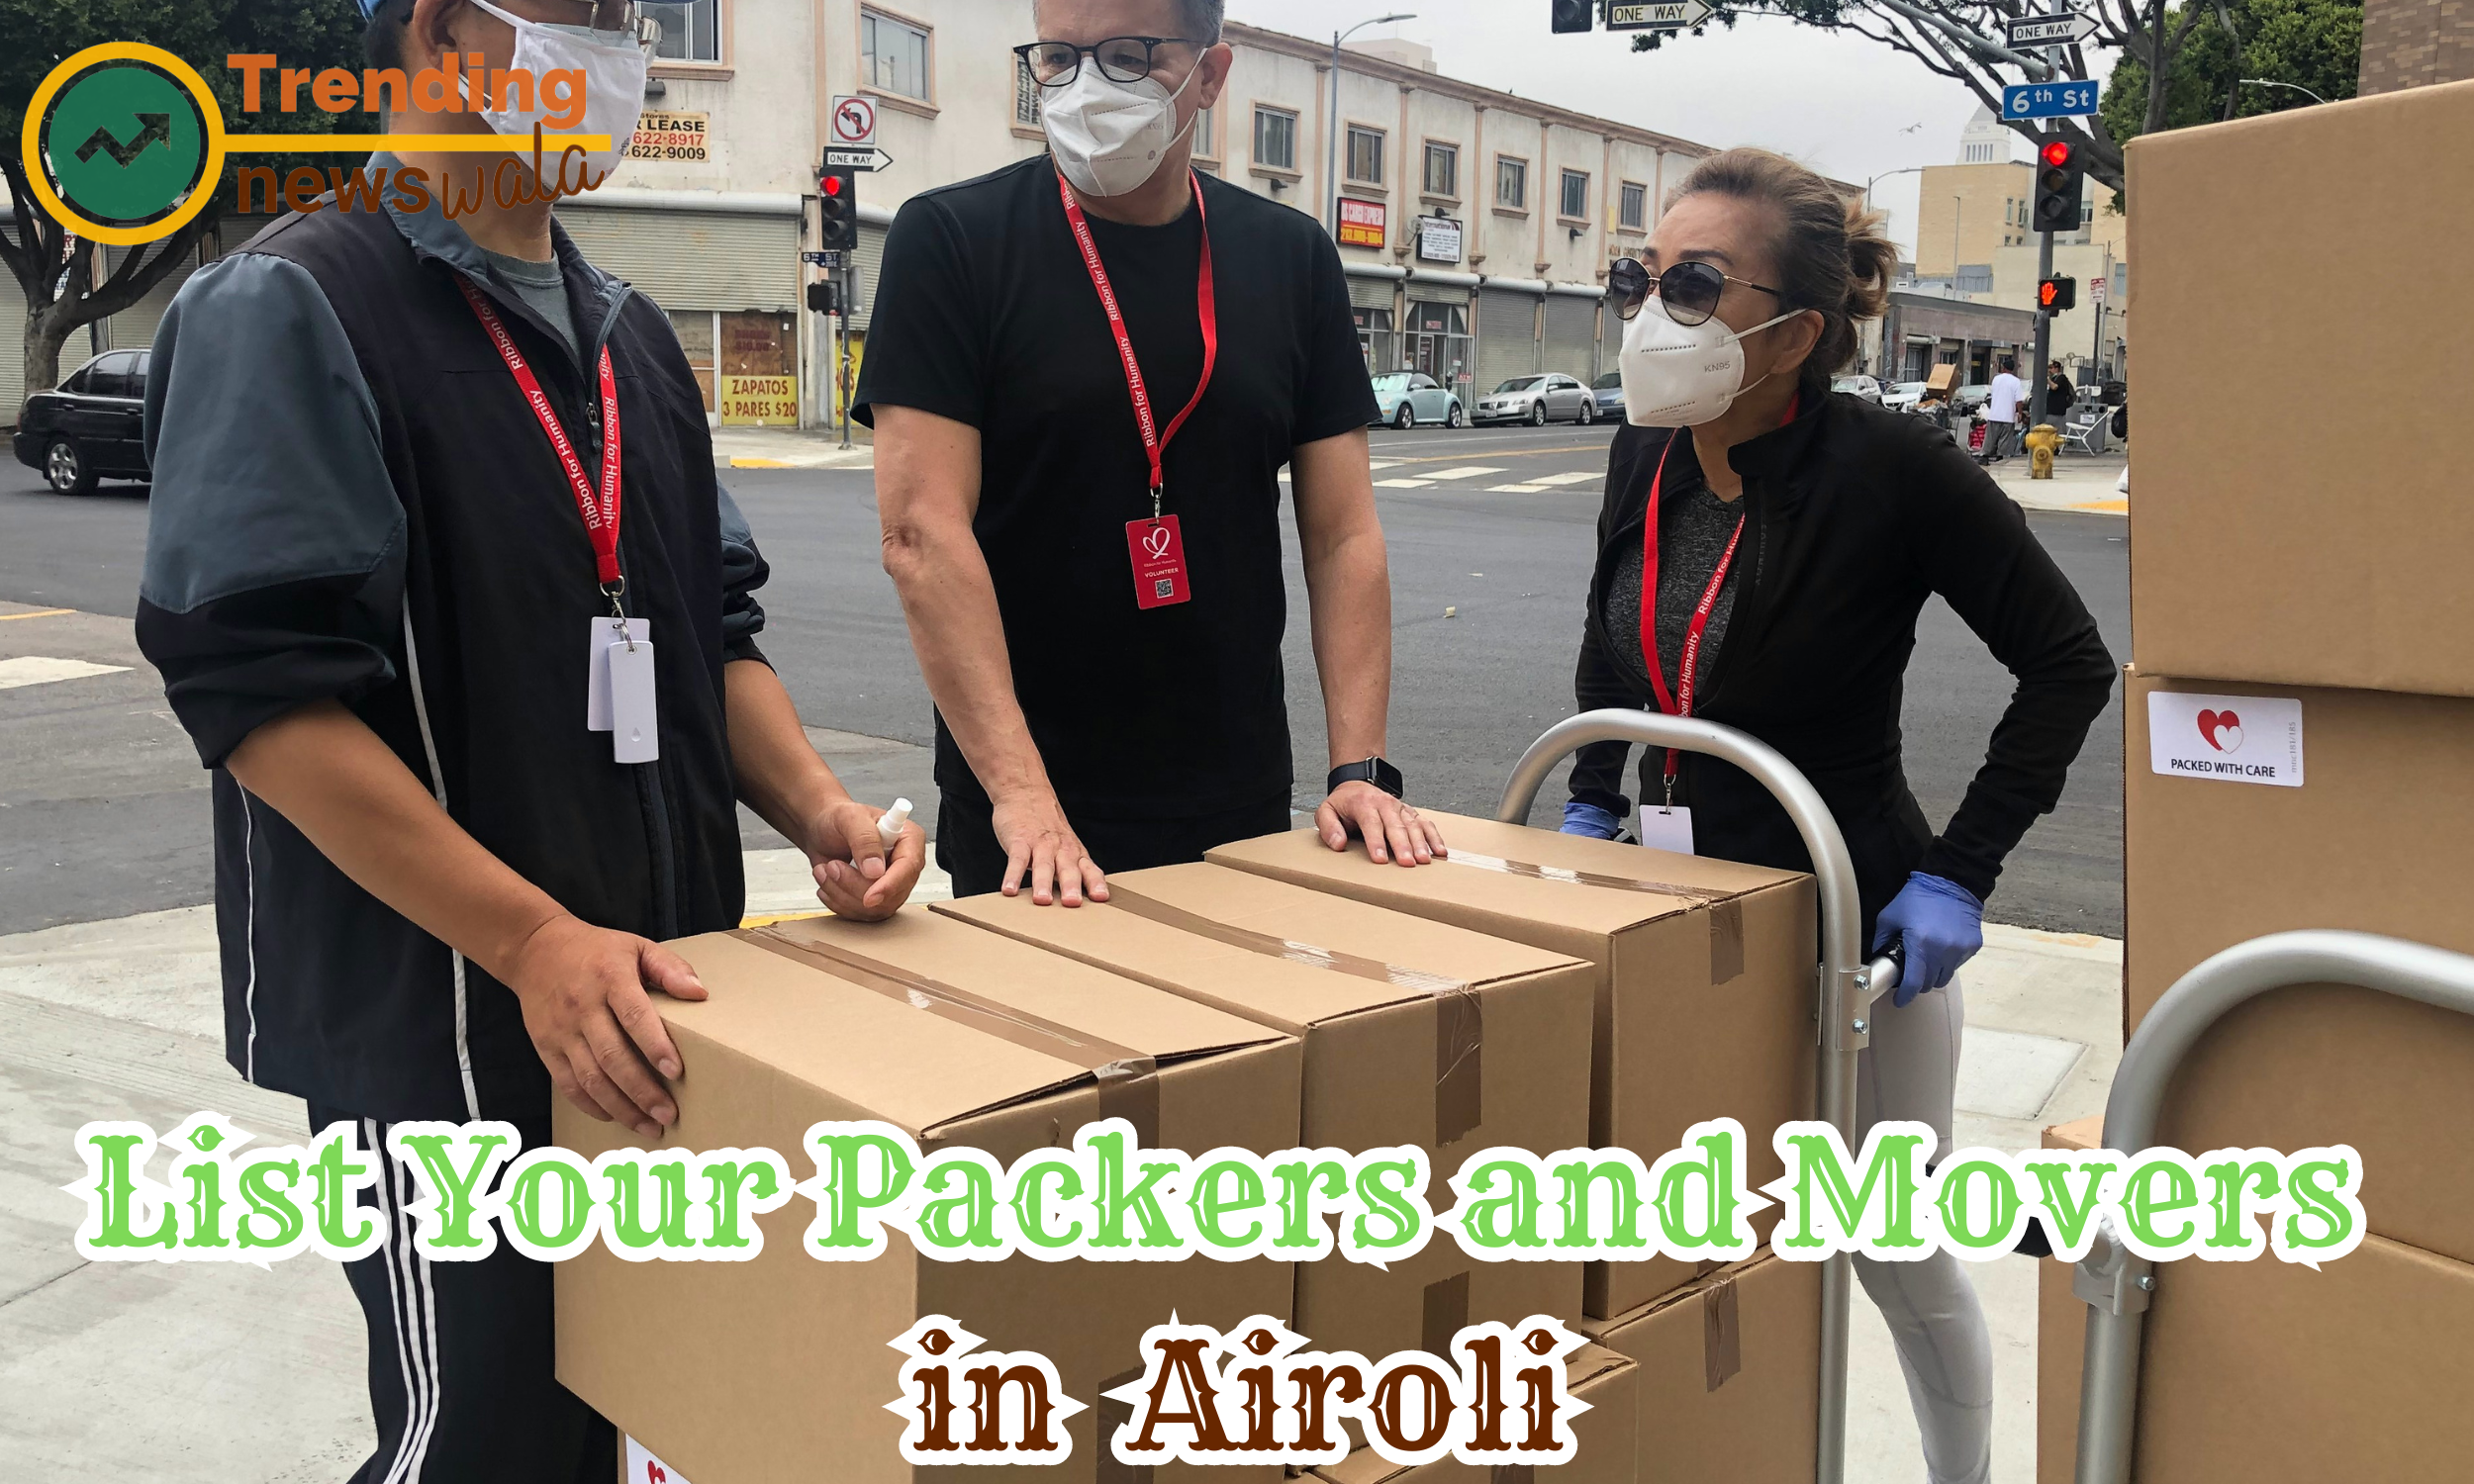 List Your Packers and Movers in Airoli